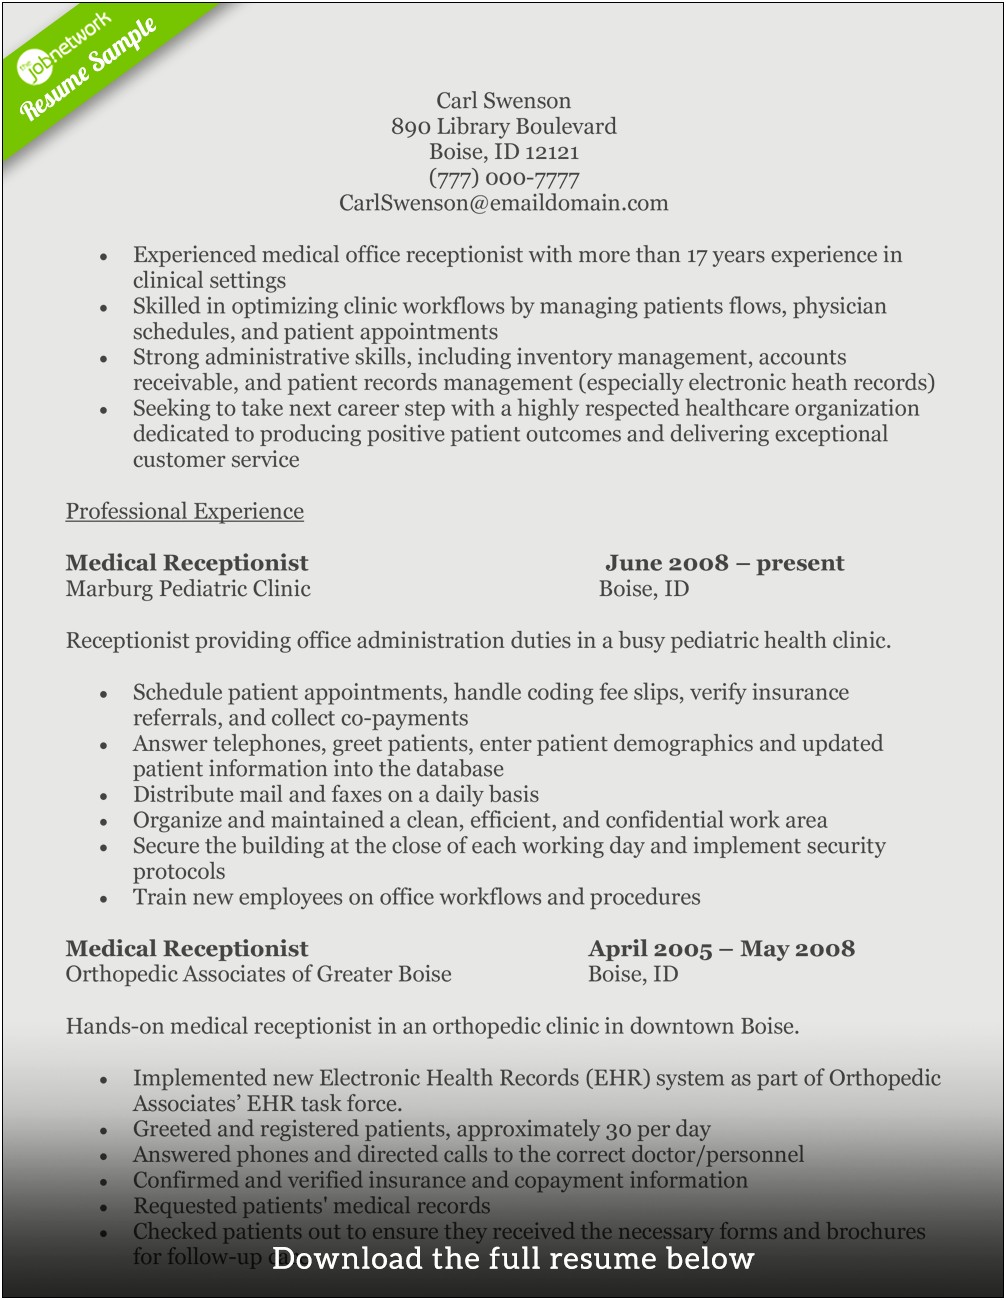 Writing Sample For A Legal Receptionist Resume